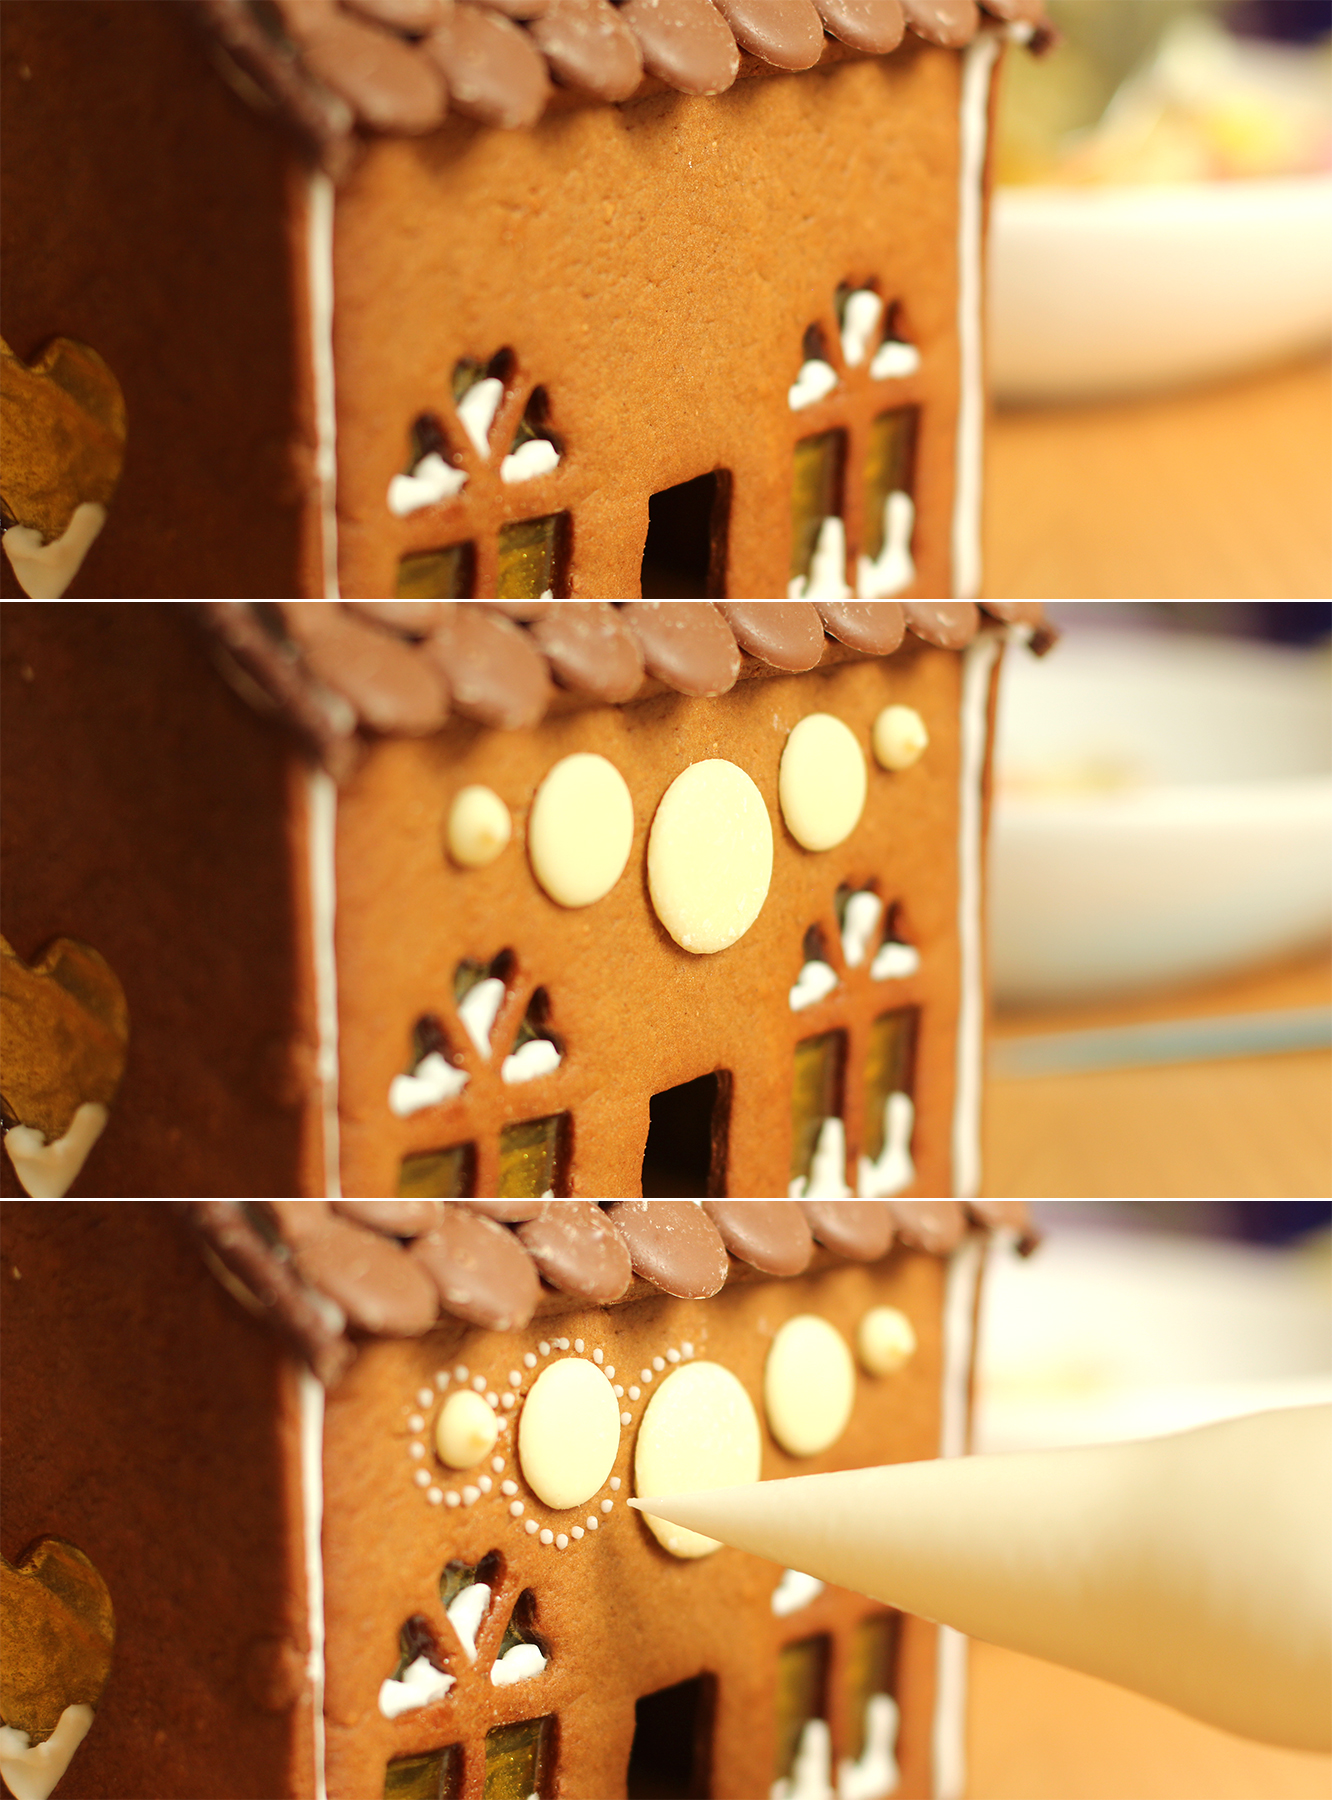 gingerbread-house-village-recipe-guide-16